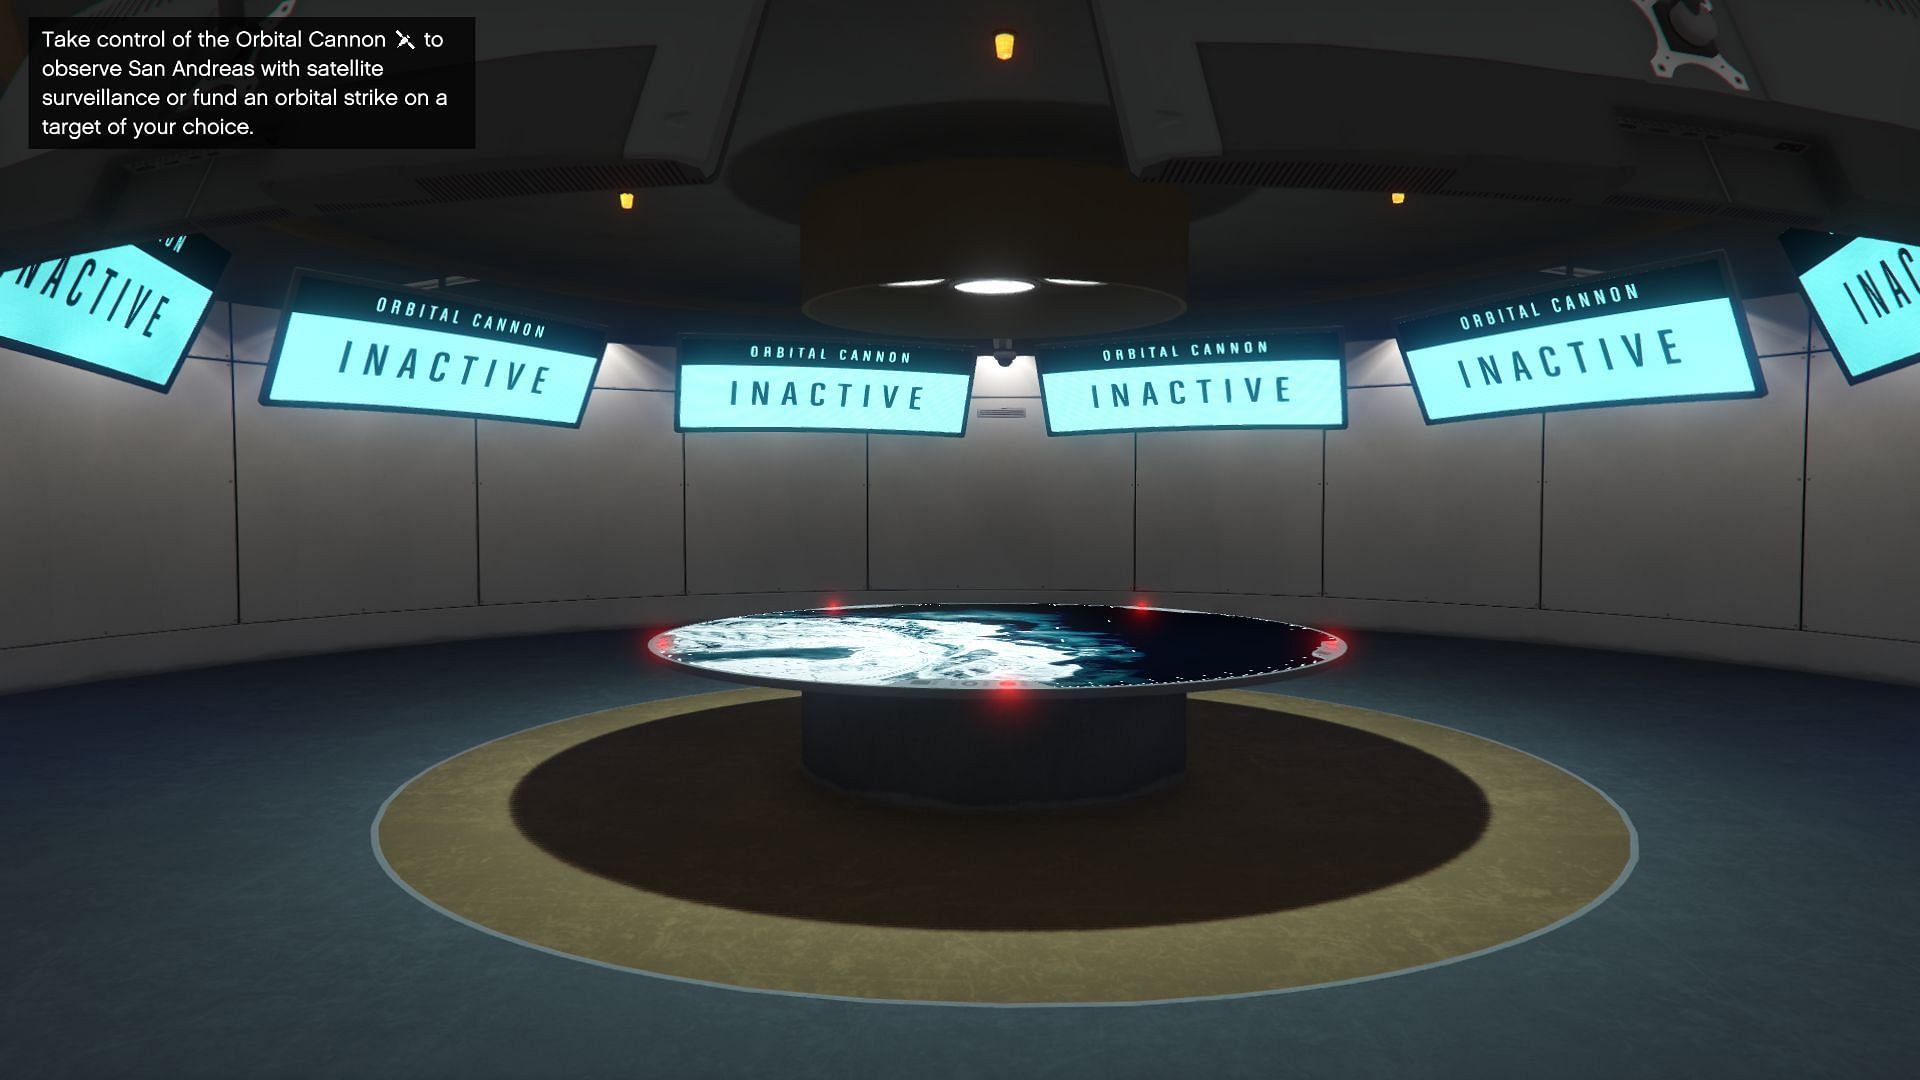 An example of an inactive Orbital Cannon (Image via Rockstar Games)